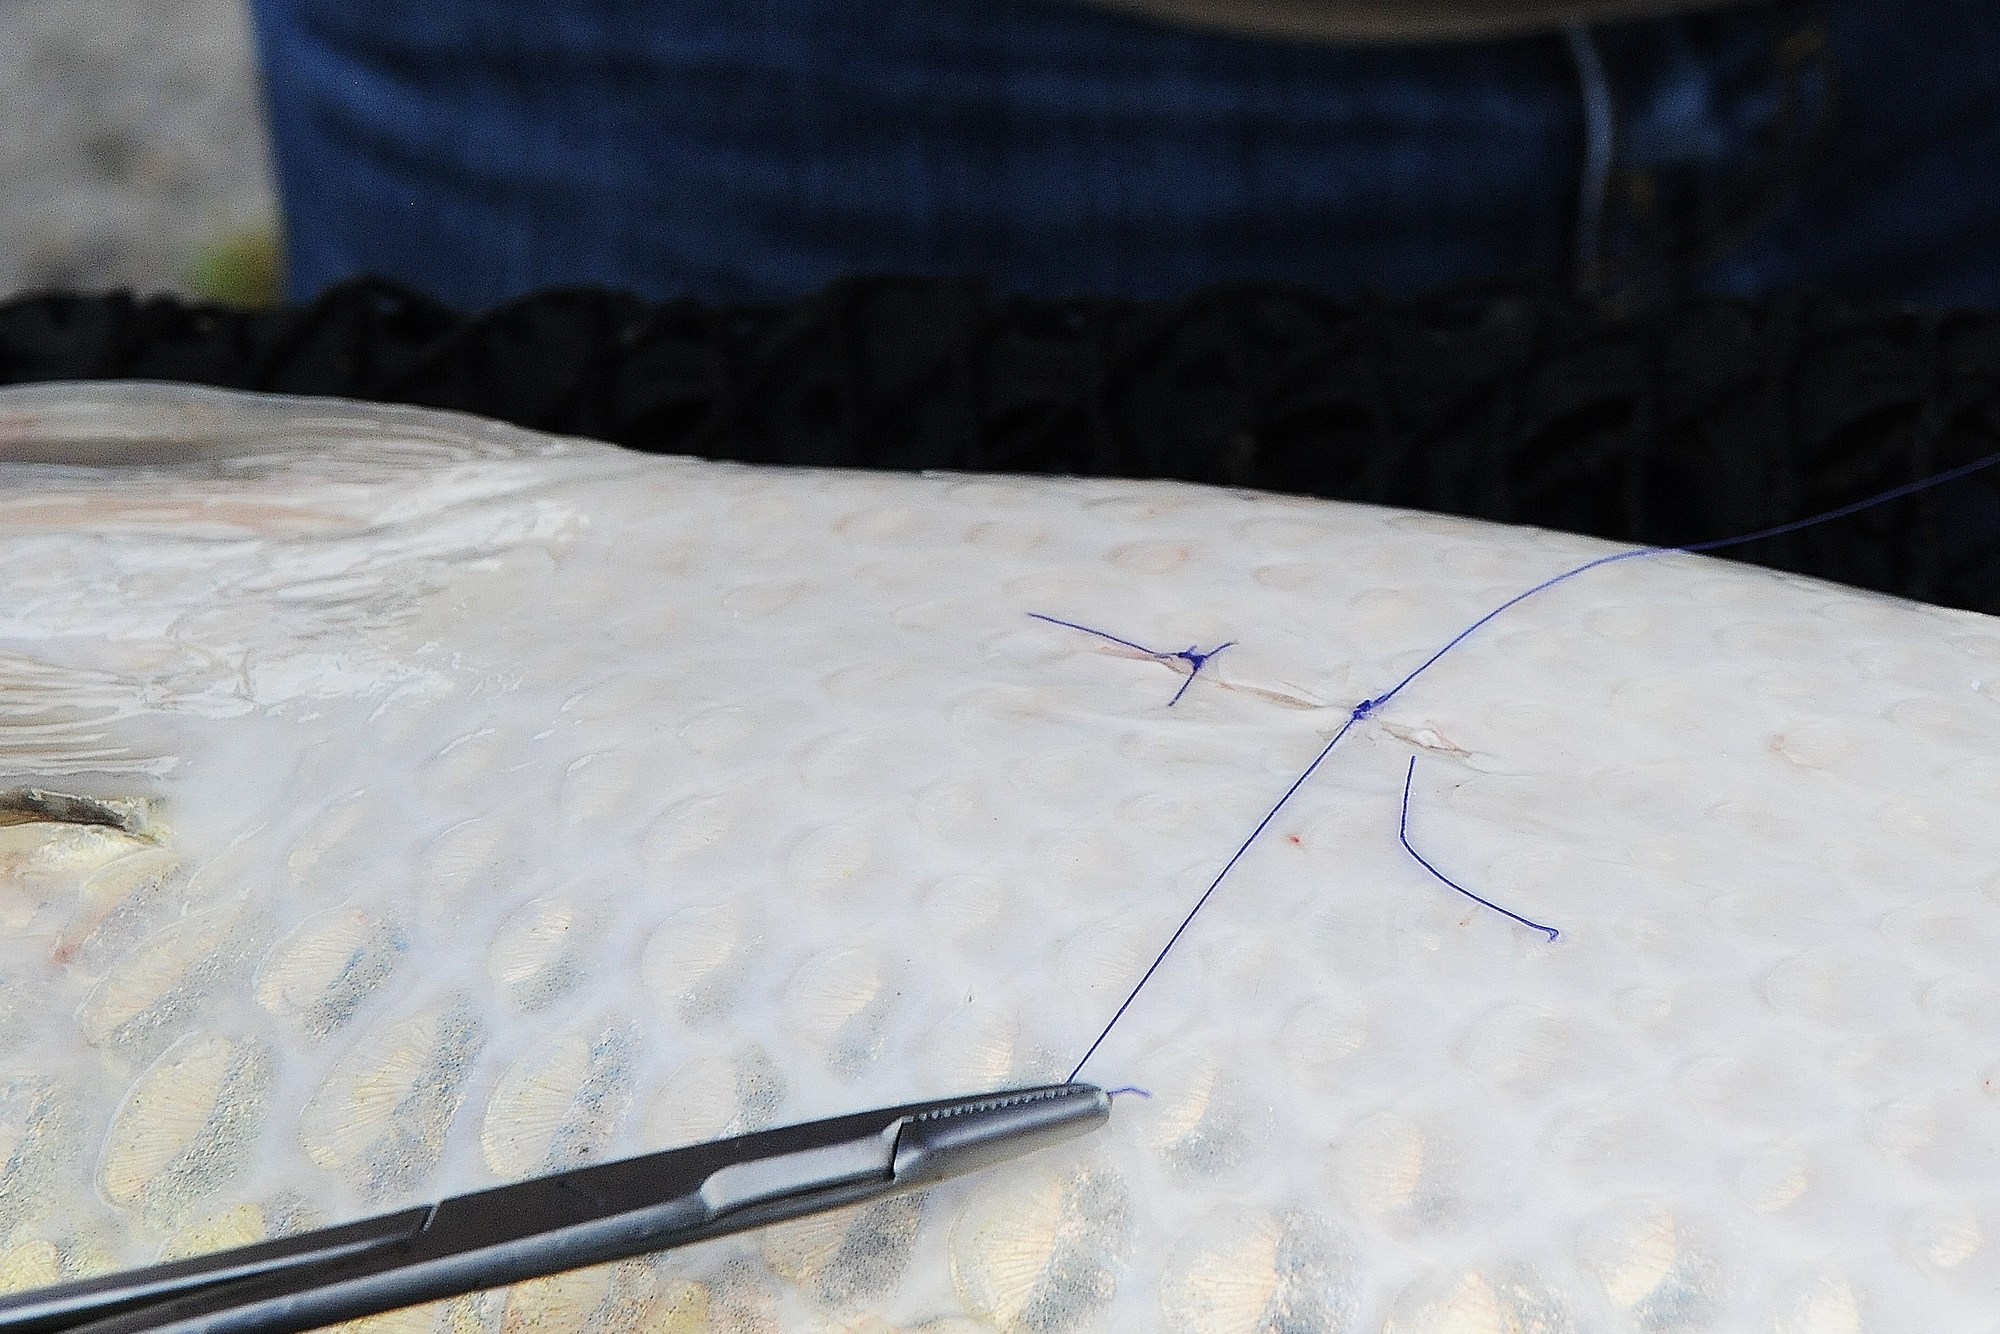 An incision on a grass carp is being sutured closed after a transmitter has been placed into the stomach cavity.